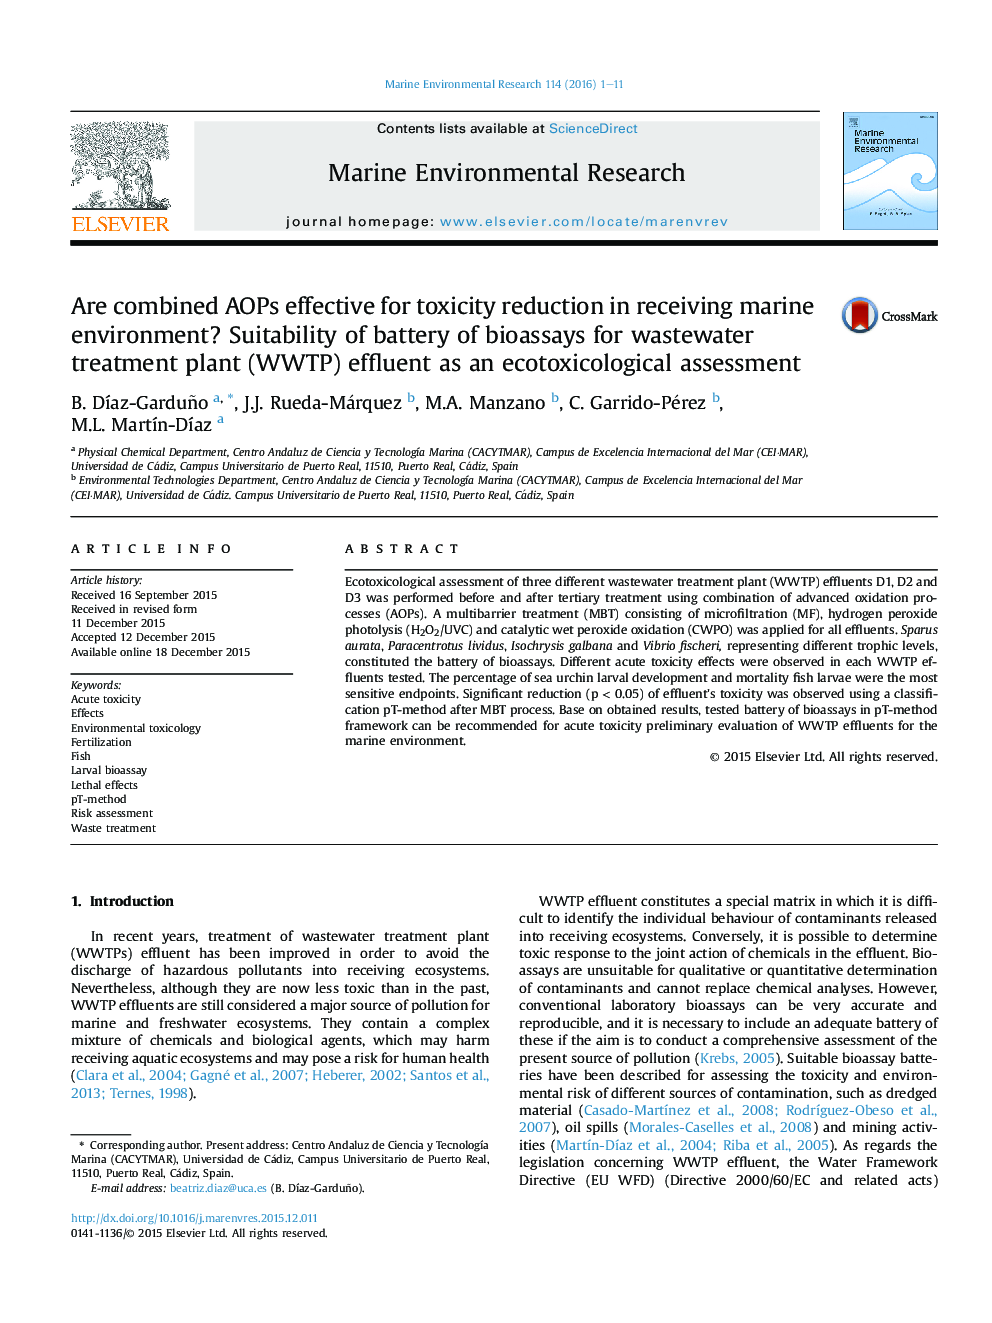 Are combined AOPs effective for toxicity reduction in receiving marine environment? Suitability of battery of bioassays for wastewater treatment plant (WWTP) effluent as an ecotoxicological assessment